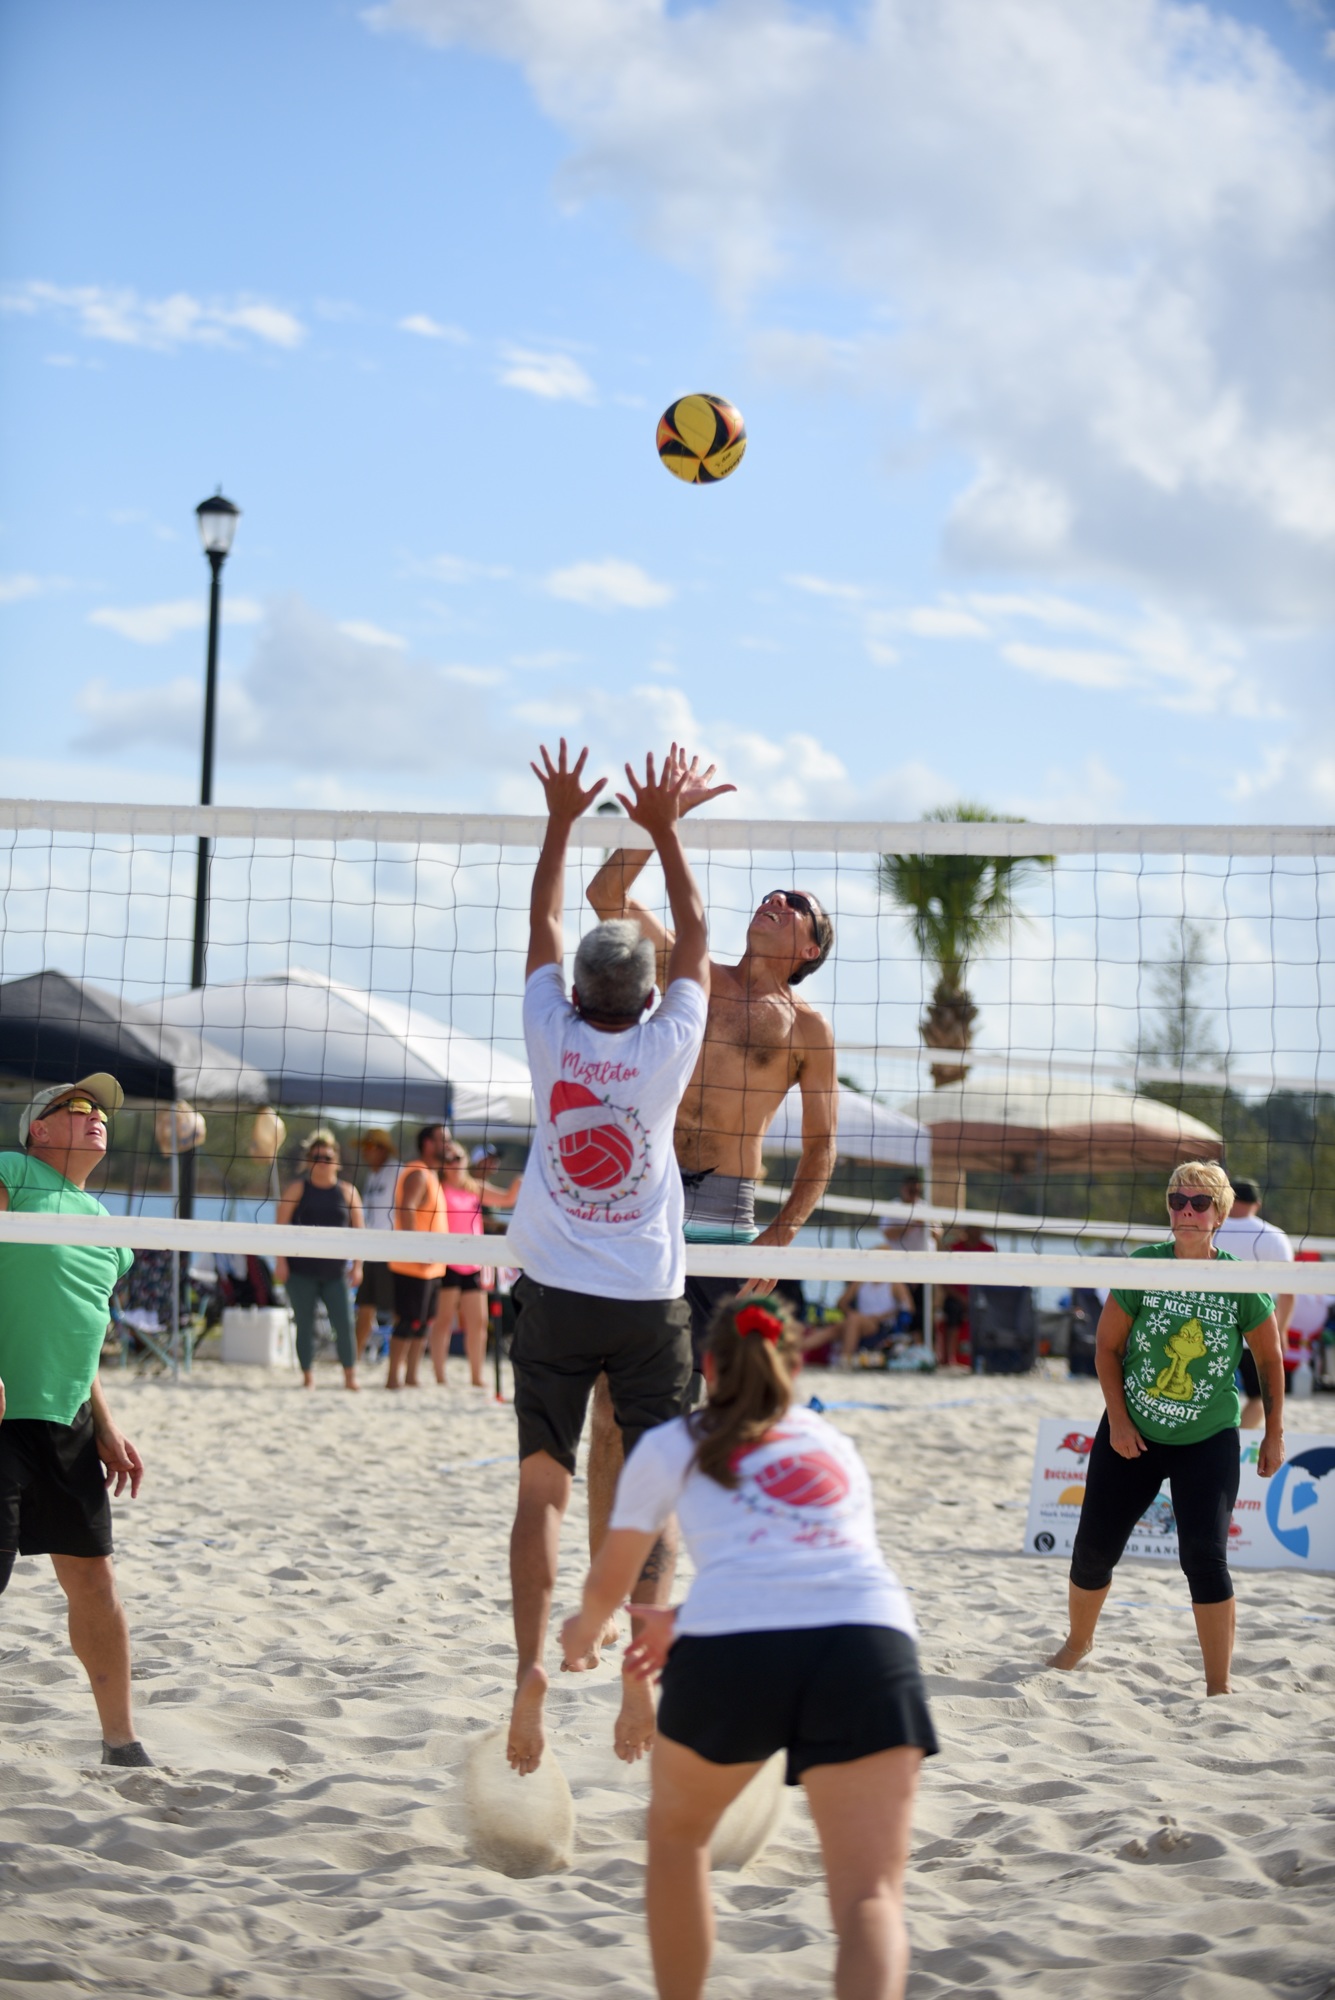 Players and spectators showed up in droves for MVP Sports and Social Club’s Holiday Volleyball Tournament at Waterside Place: 180 players participated in the tourney, and more than 50 people showed up to watch.